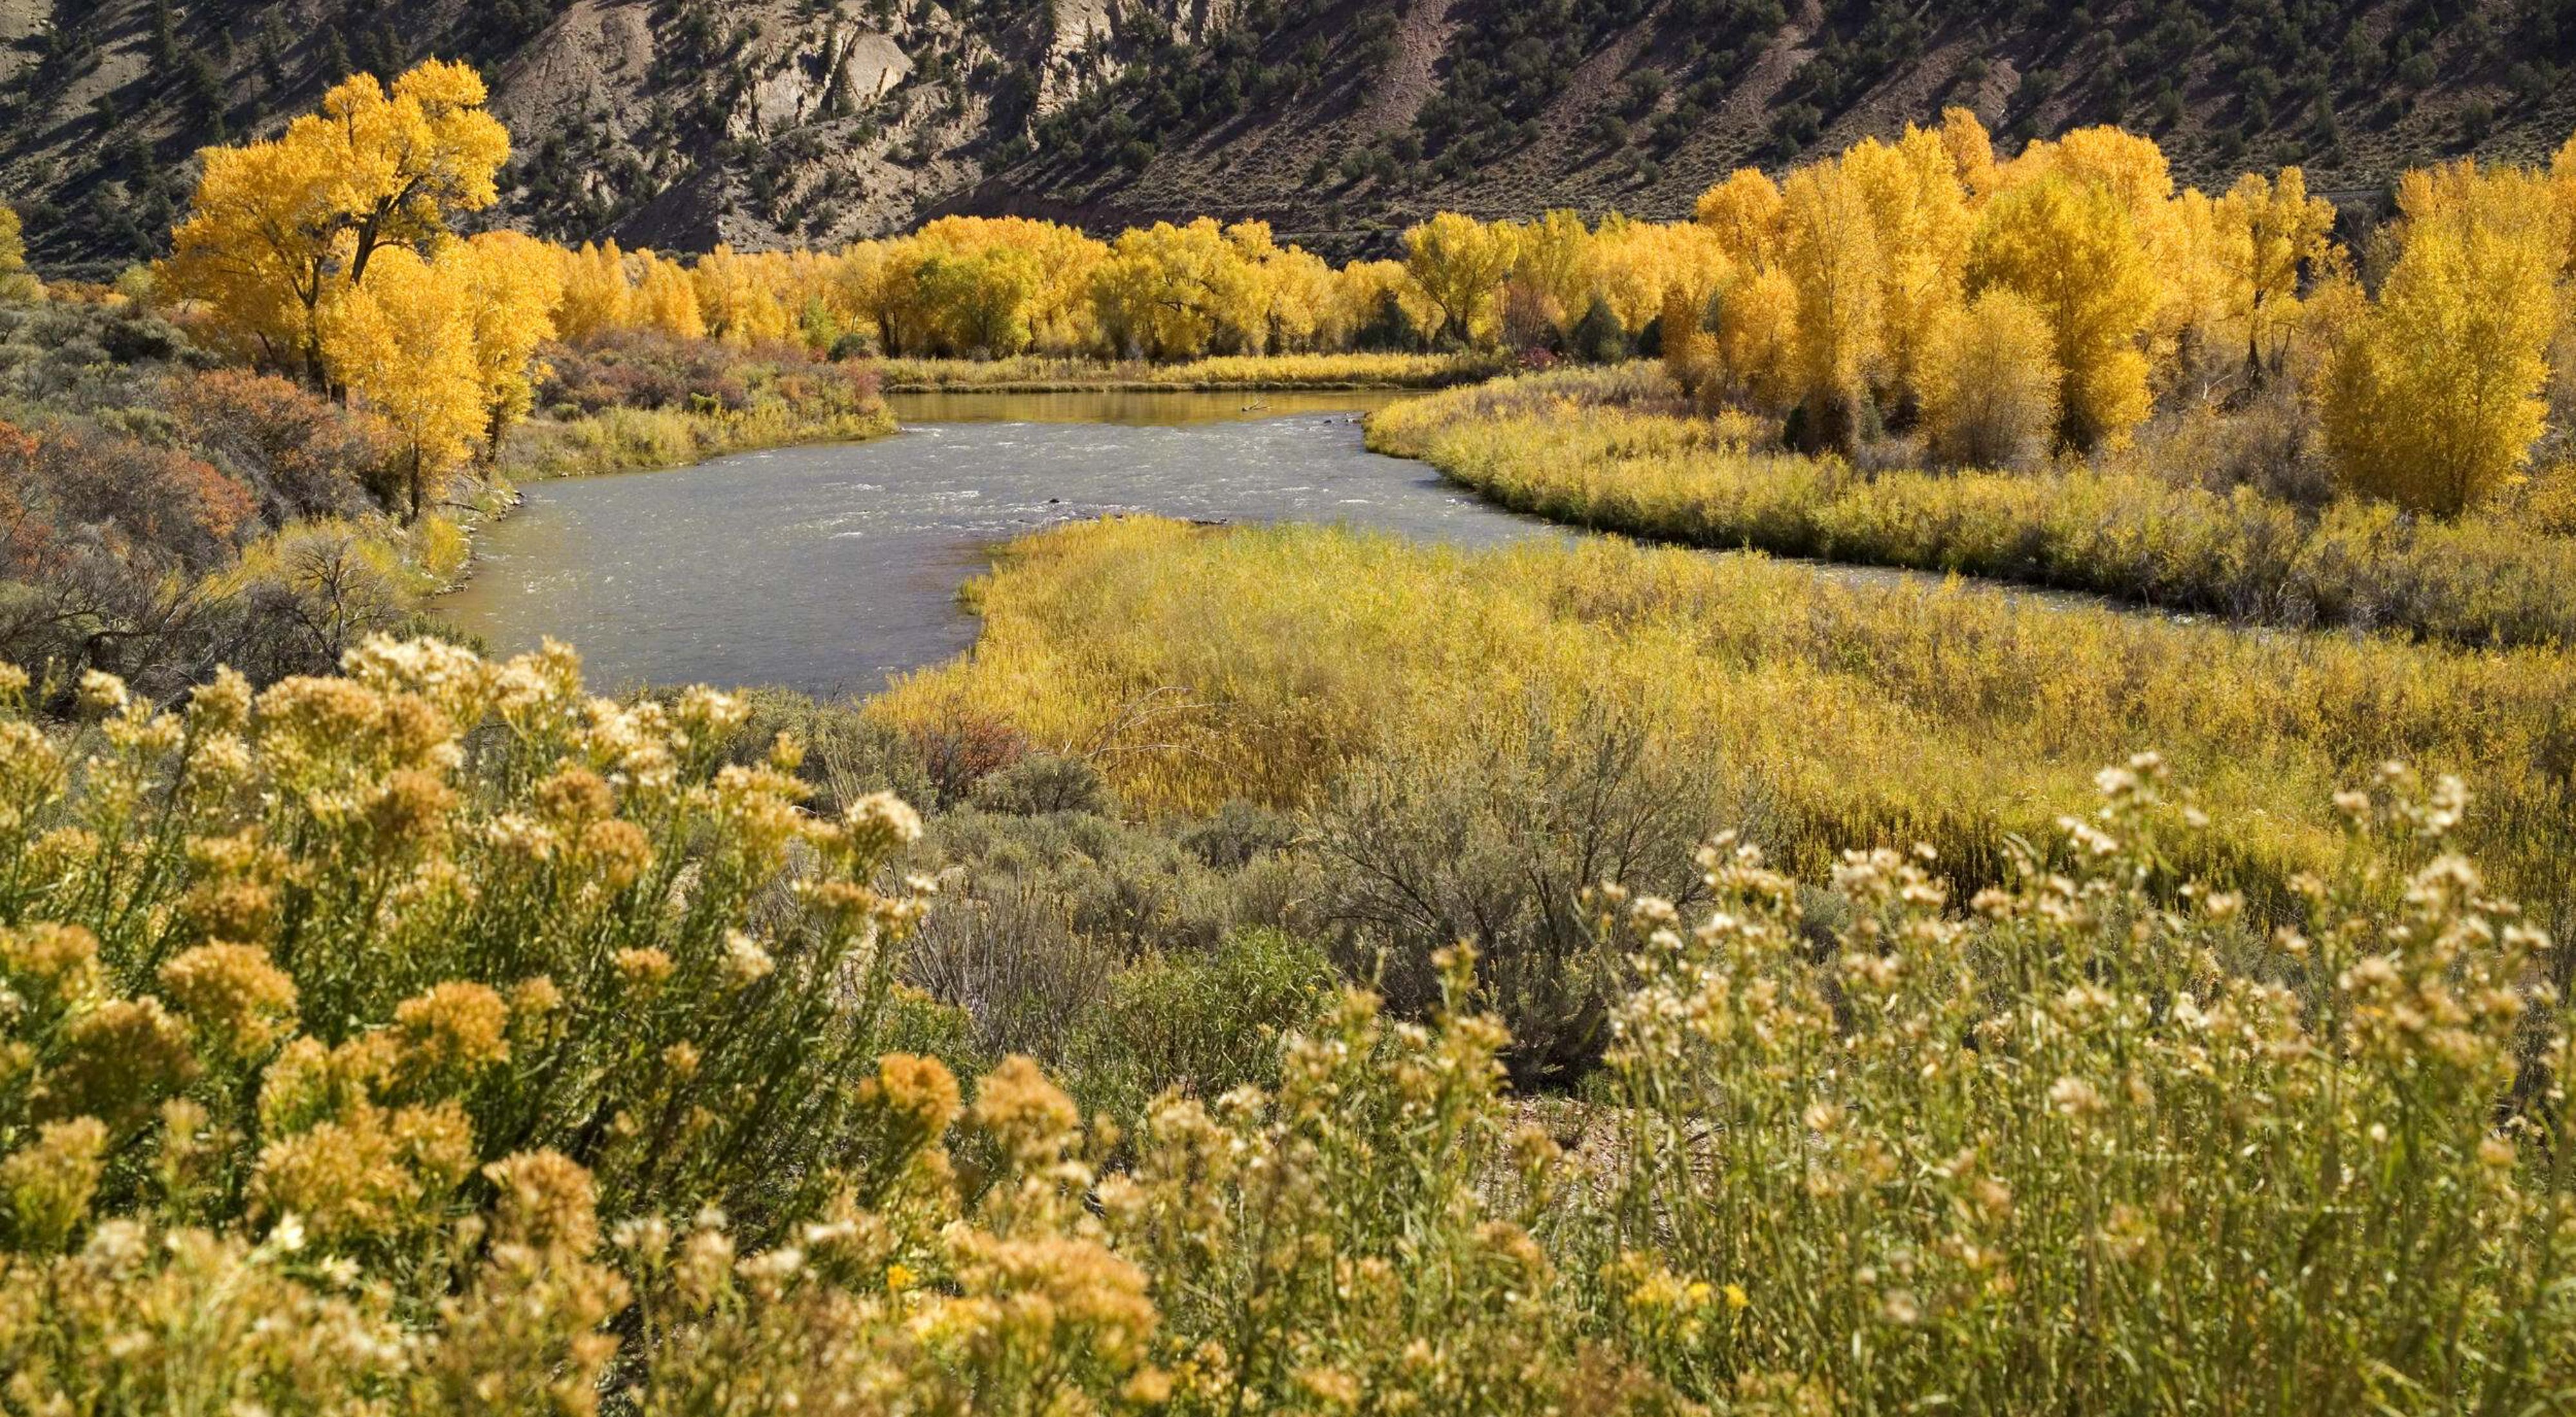 Golden yellow trees and vegetation line the banks of a river.